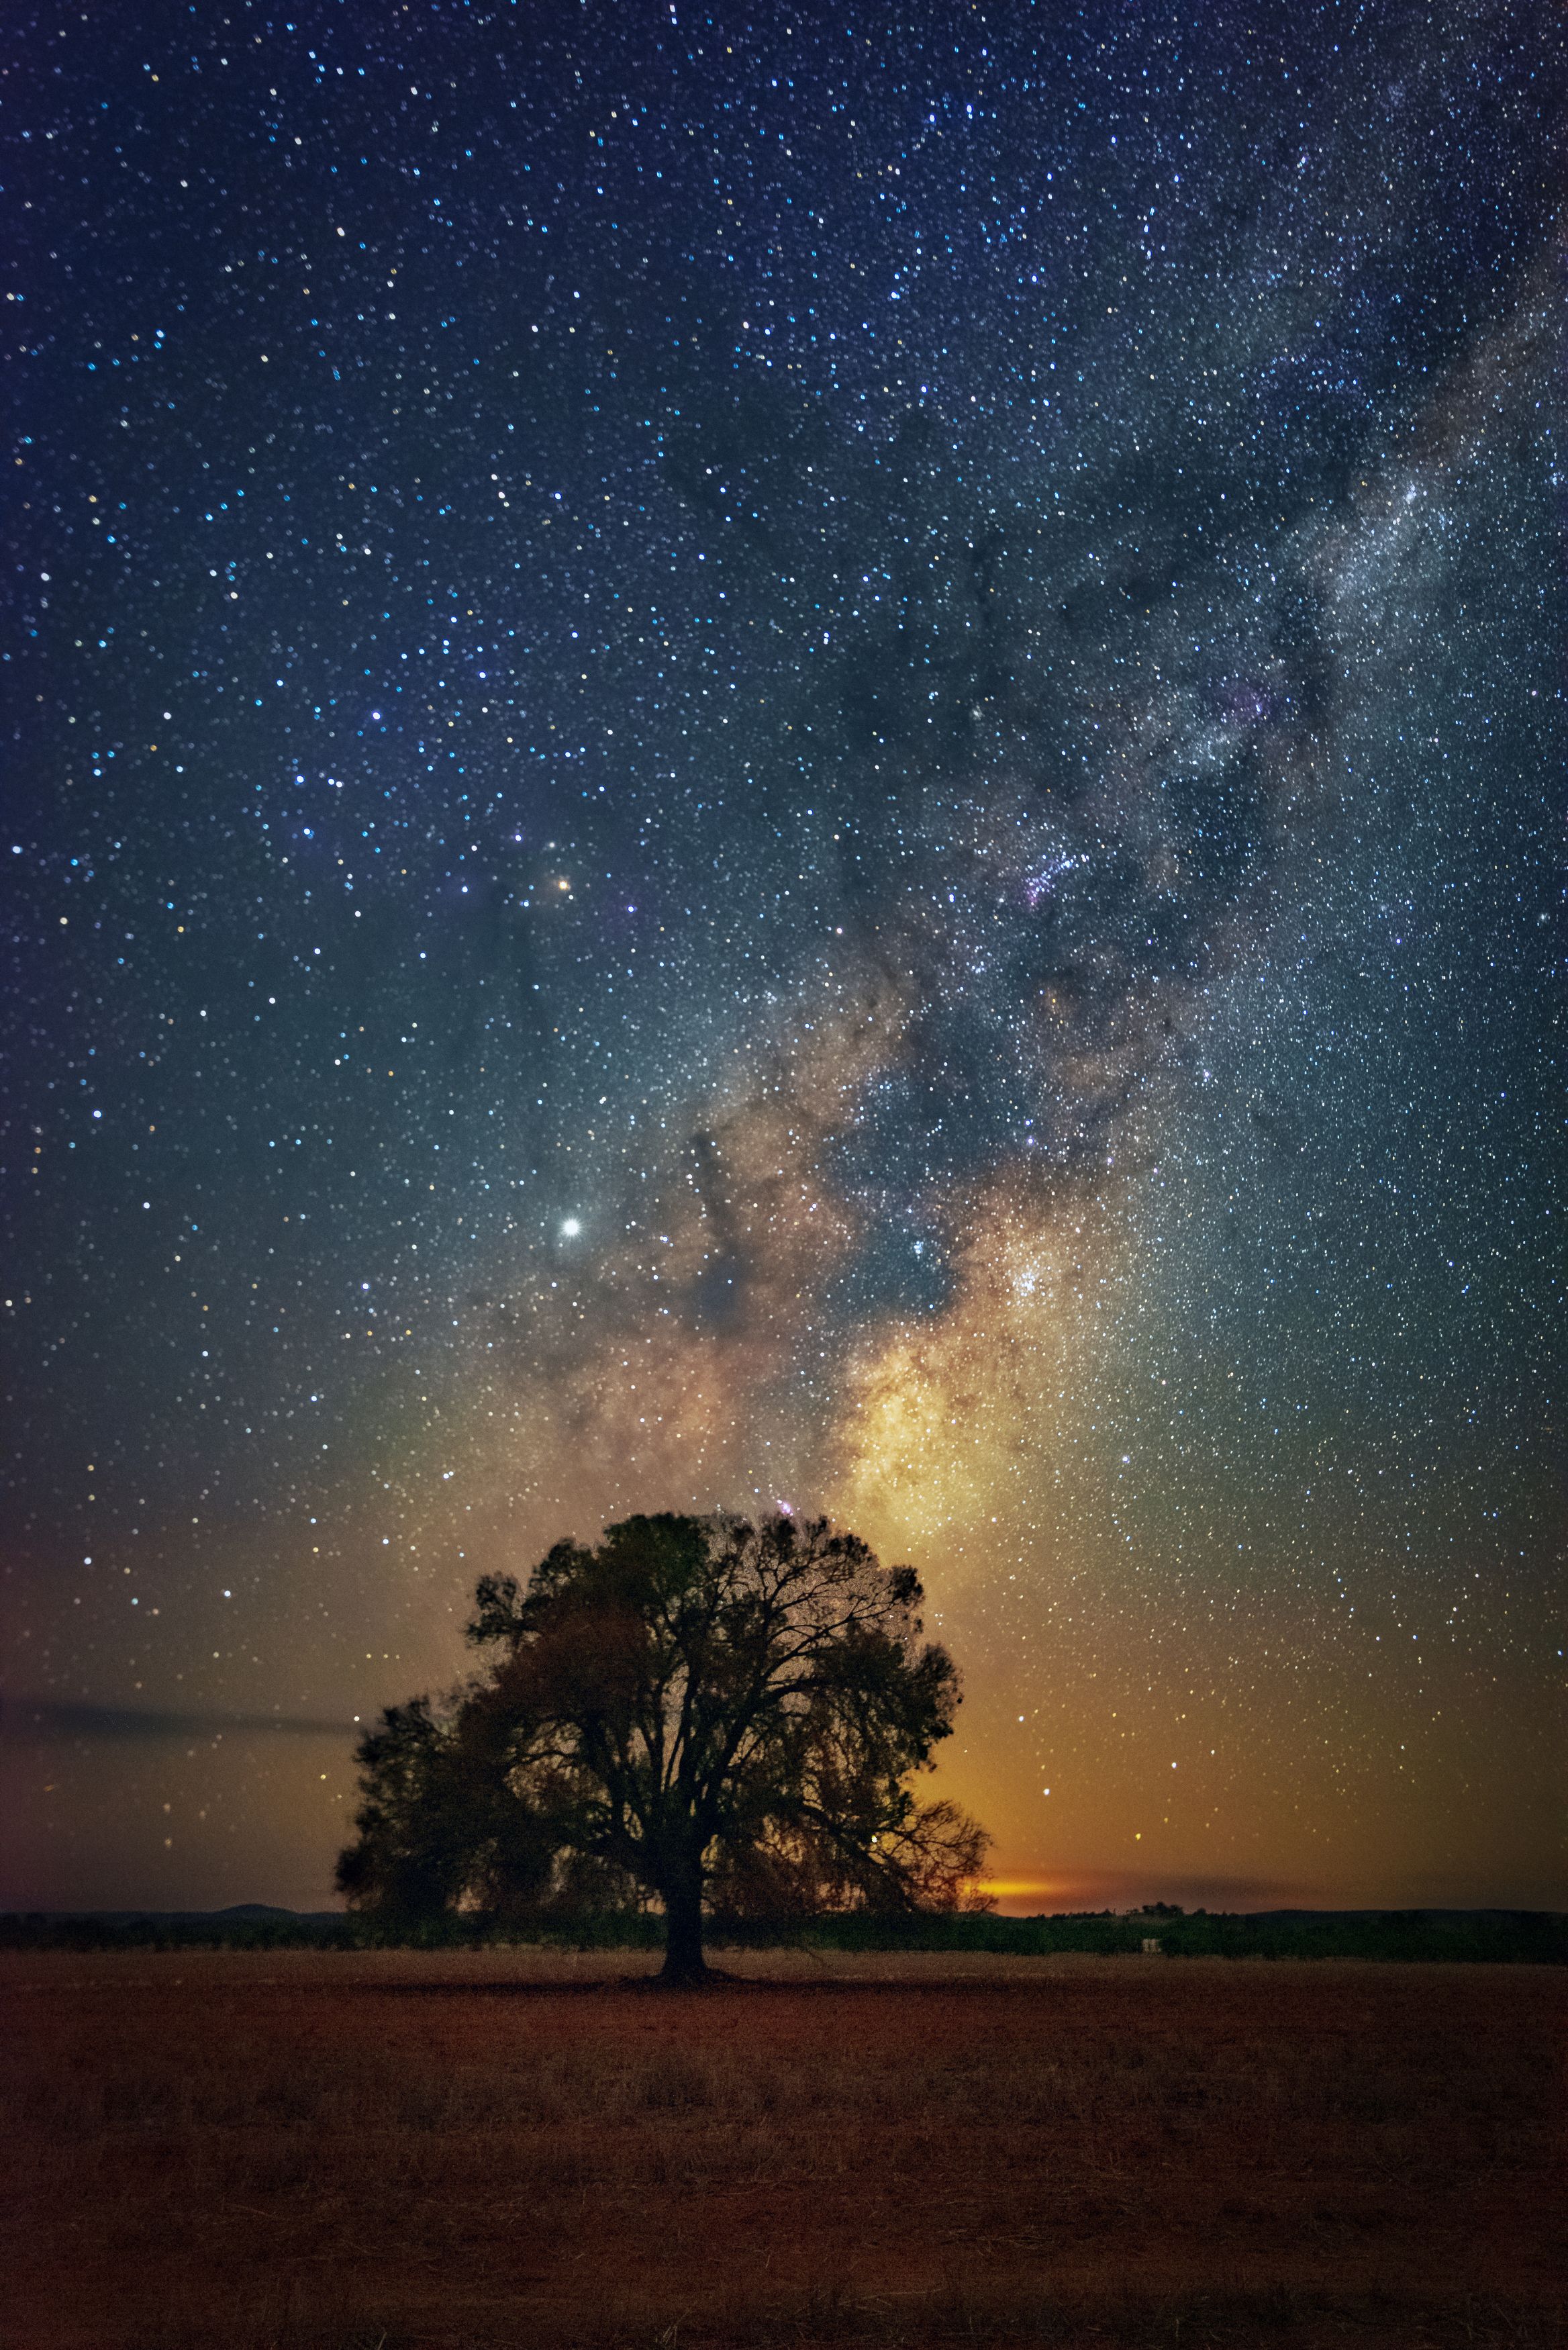 #milkyway #stars #love #night #nikon #nightscapes, Imagery Fascinating